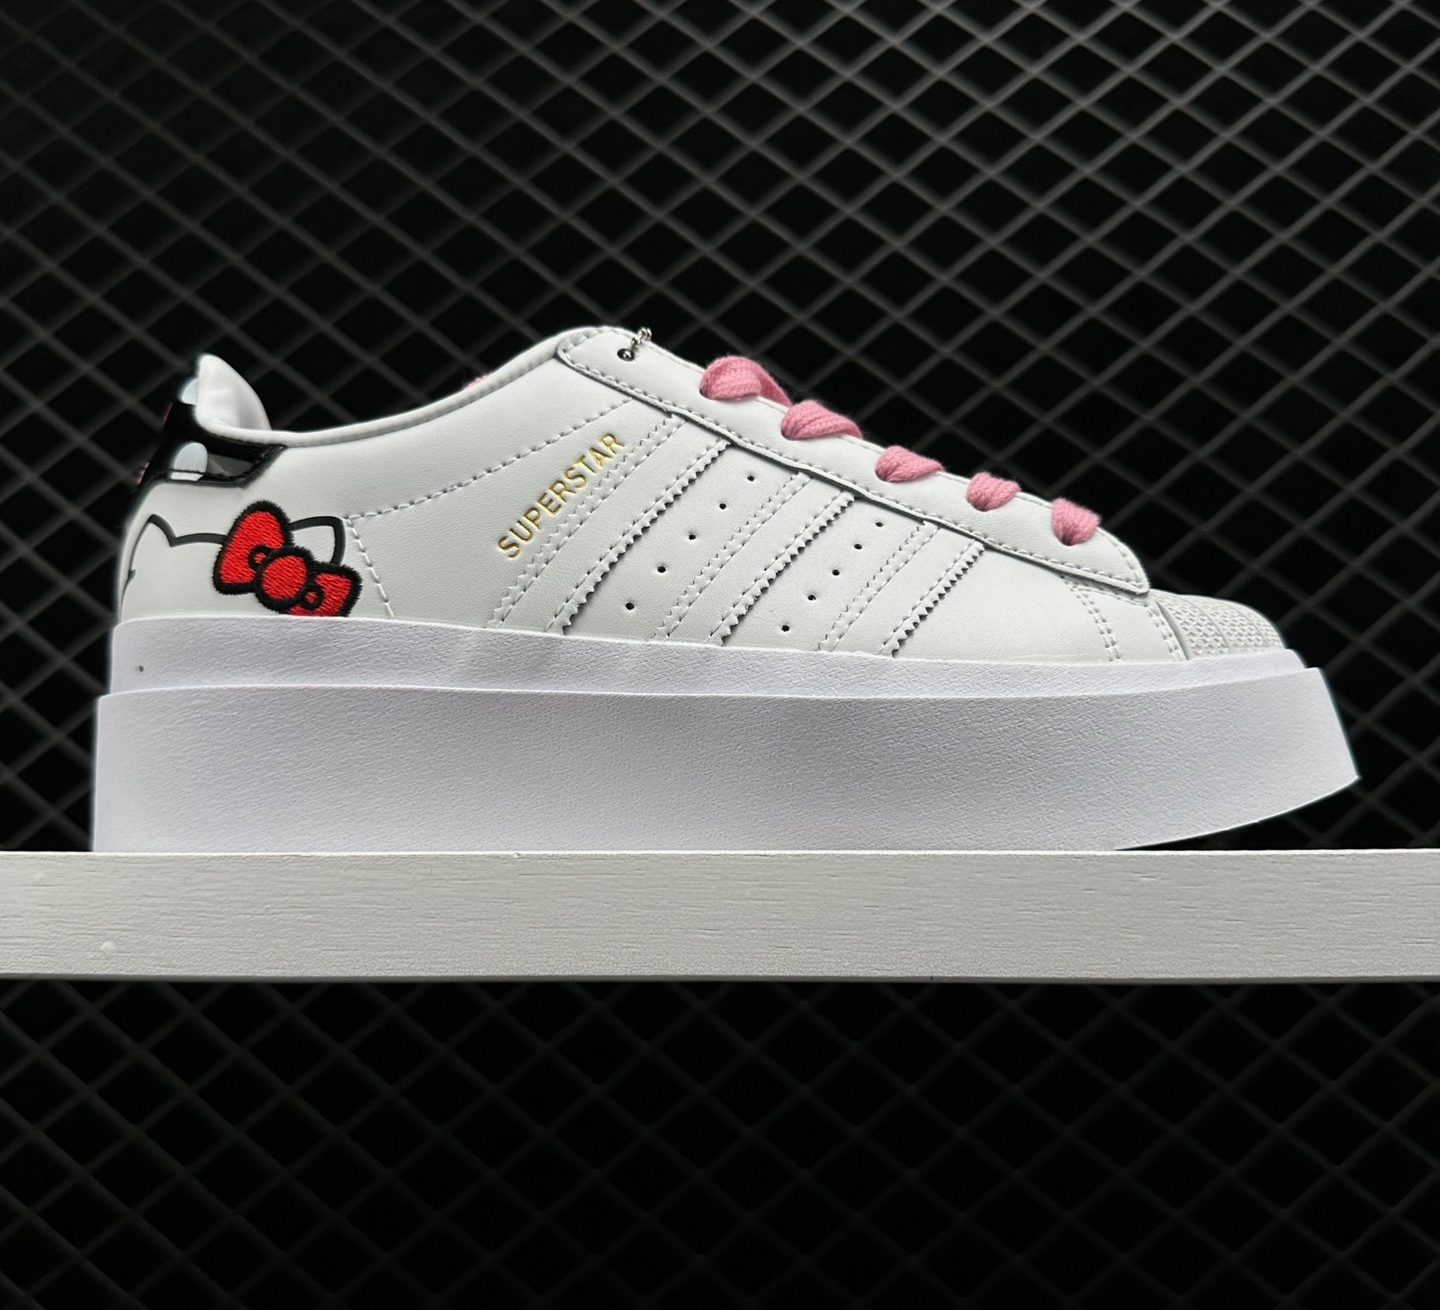 ADIDAS X HELLO KITTY SUPERSTAR White - Iconic Collaboration for Style